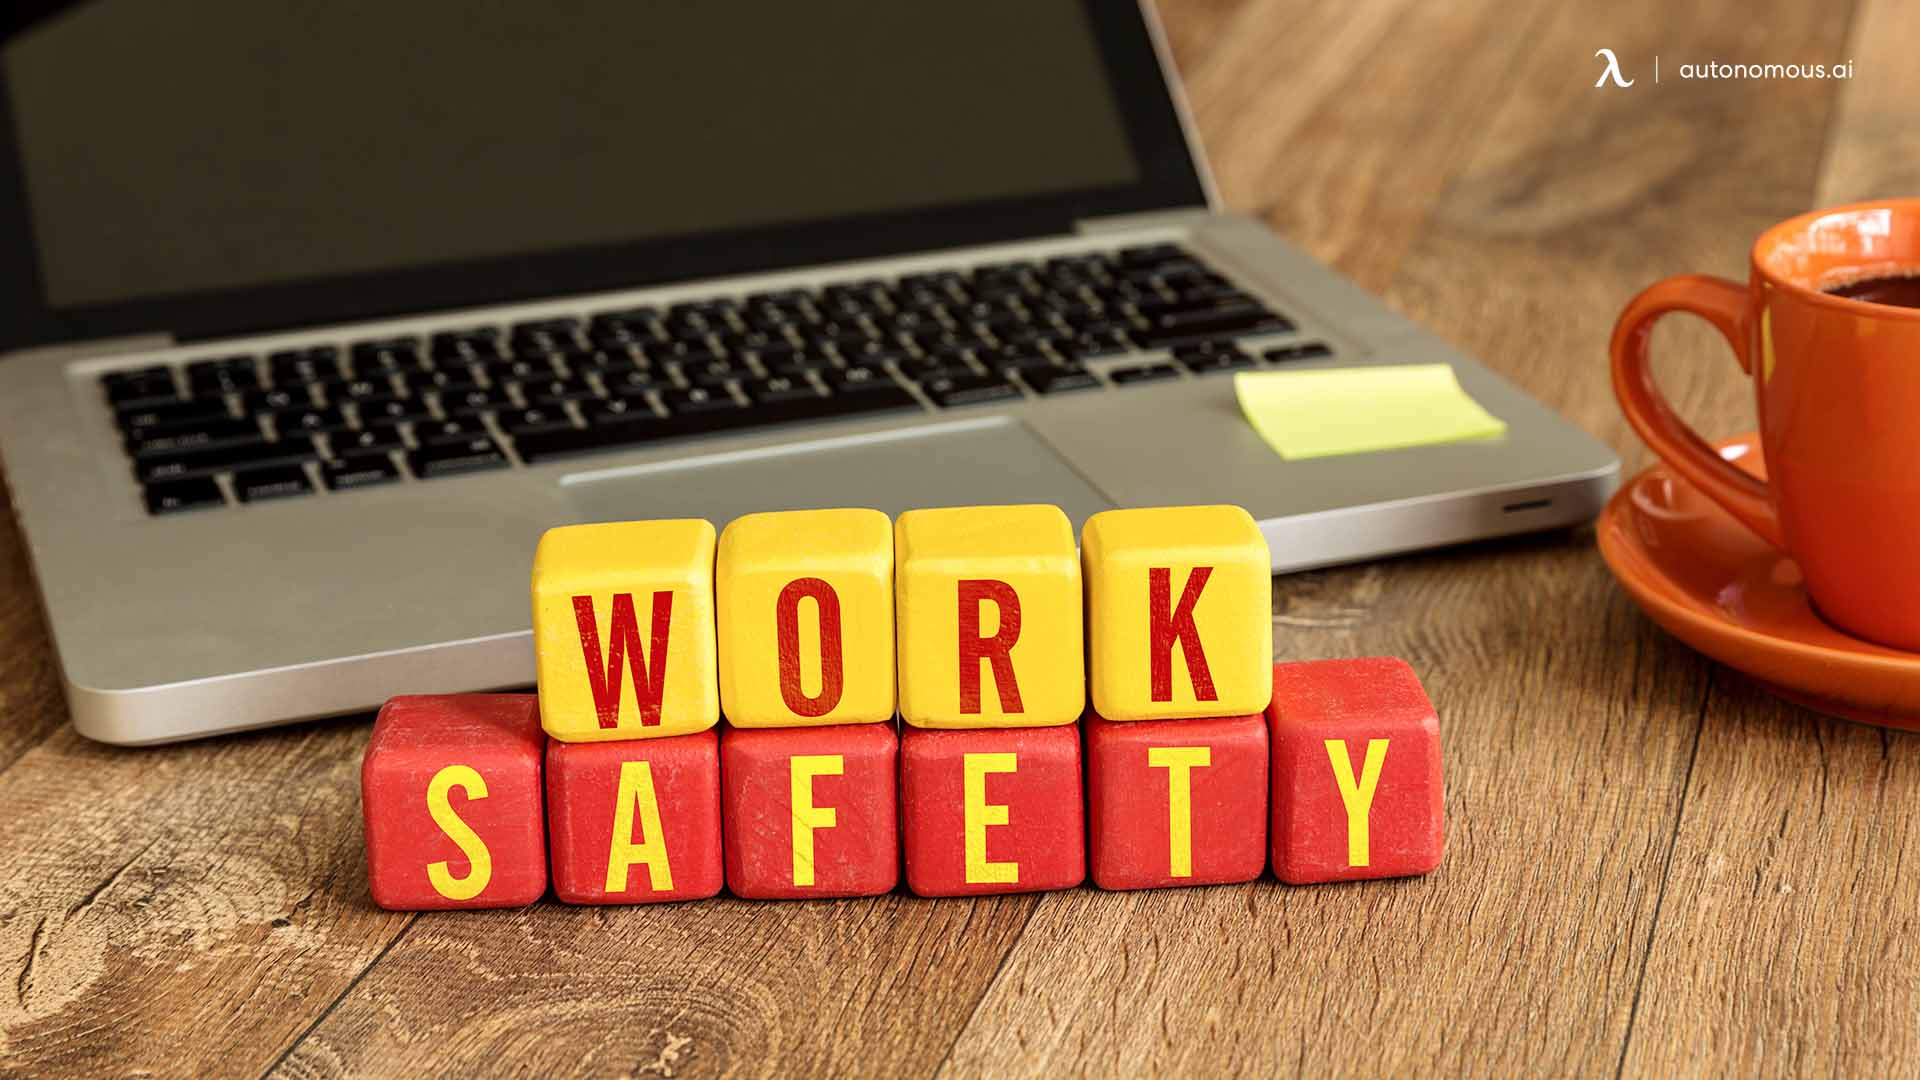 Workplace Injury Prevention: 12 Tips to Keep Focused and Body Healthy